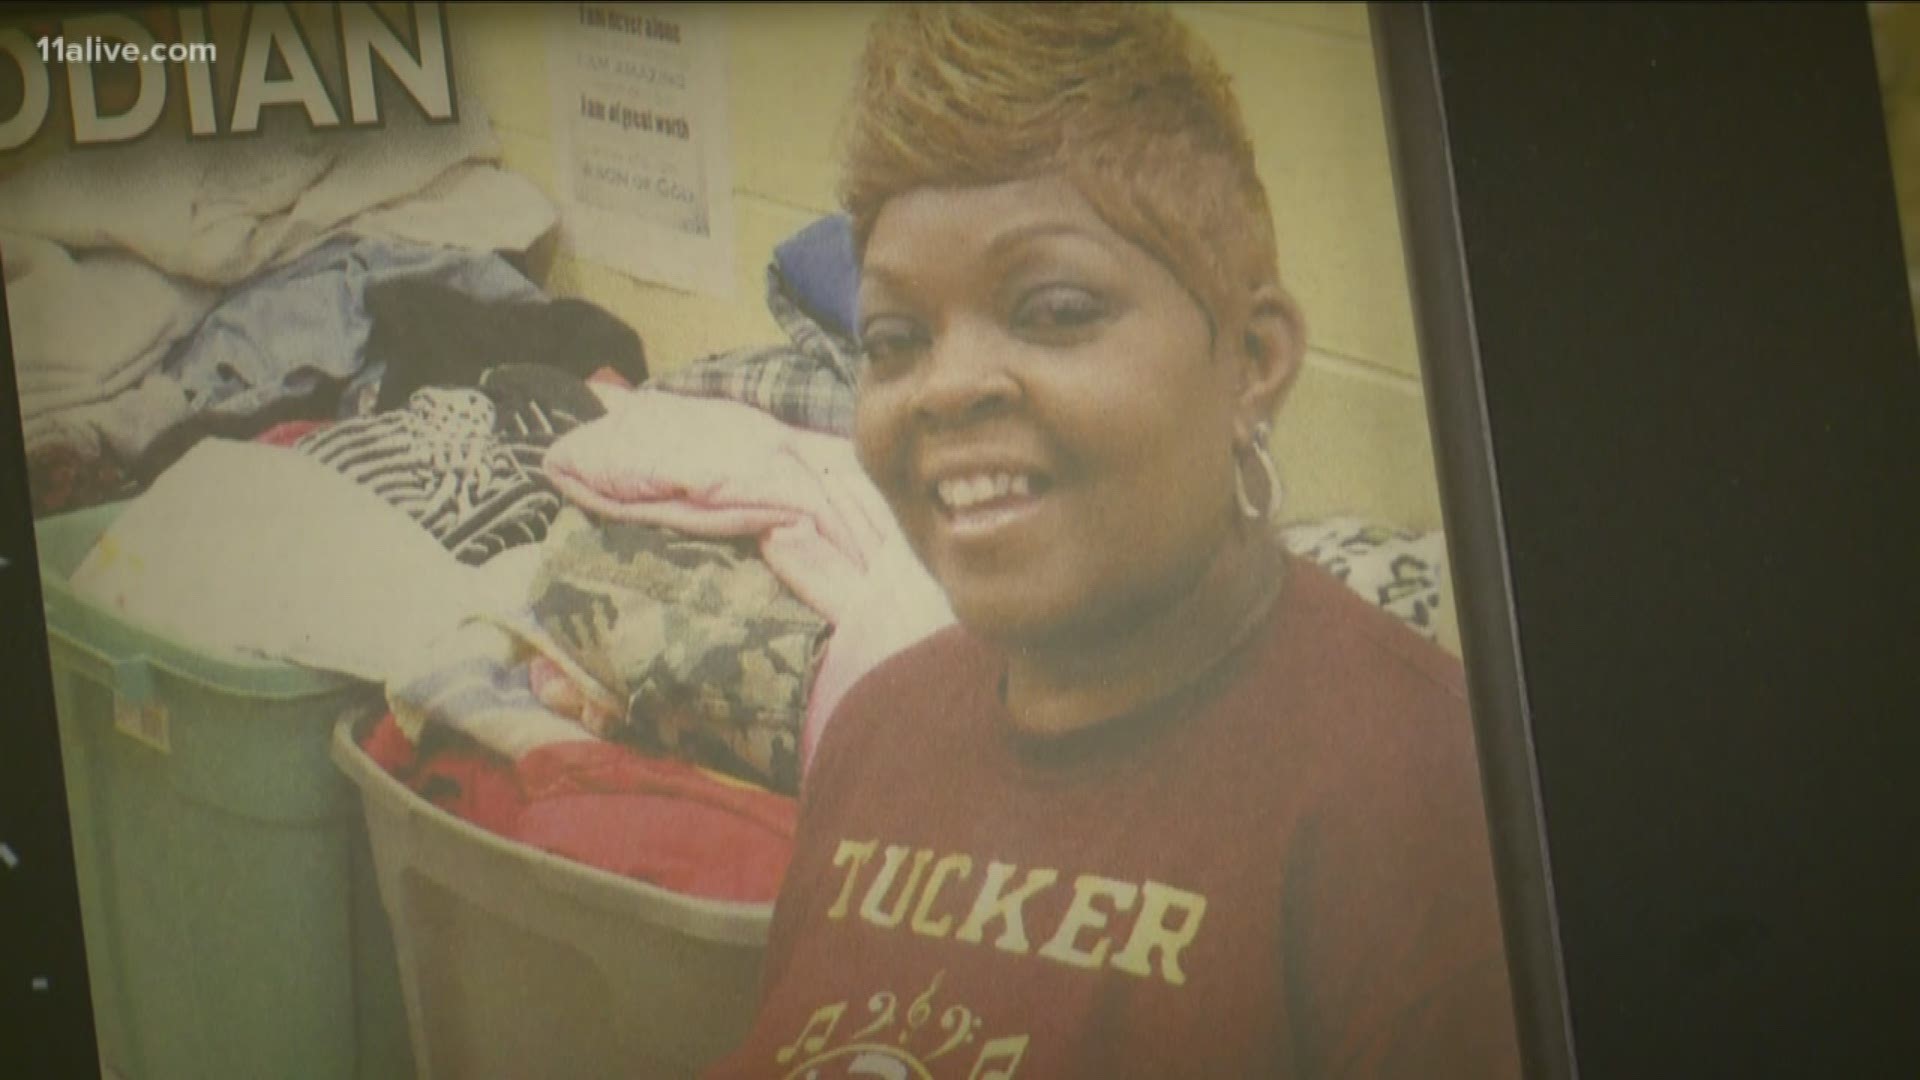 She says she started the closet after the death of her son and seeing multiple constantly students in the same attire. As a mom, she said she had to help.